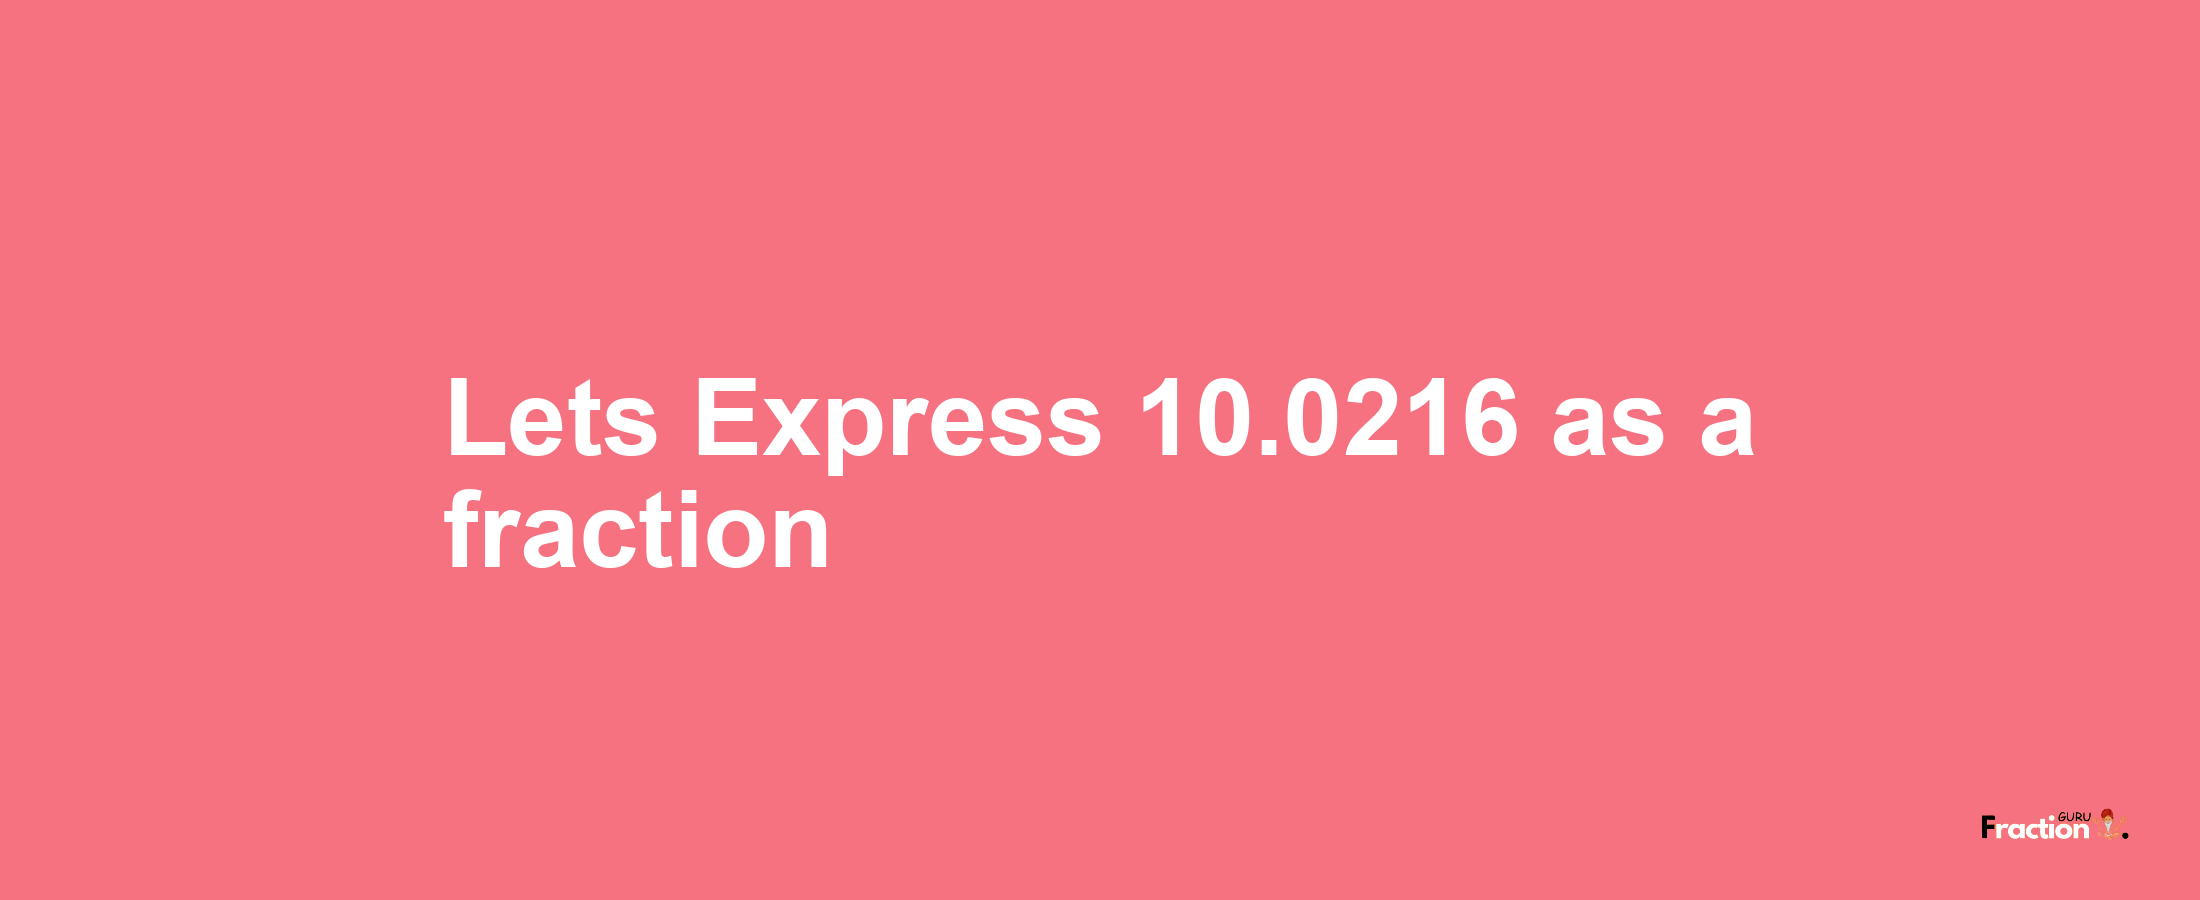 Lets Express 10.0216 as afraction